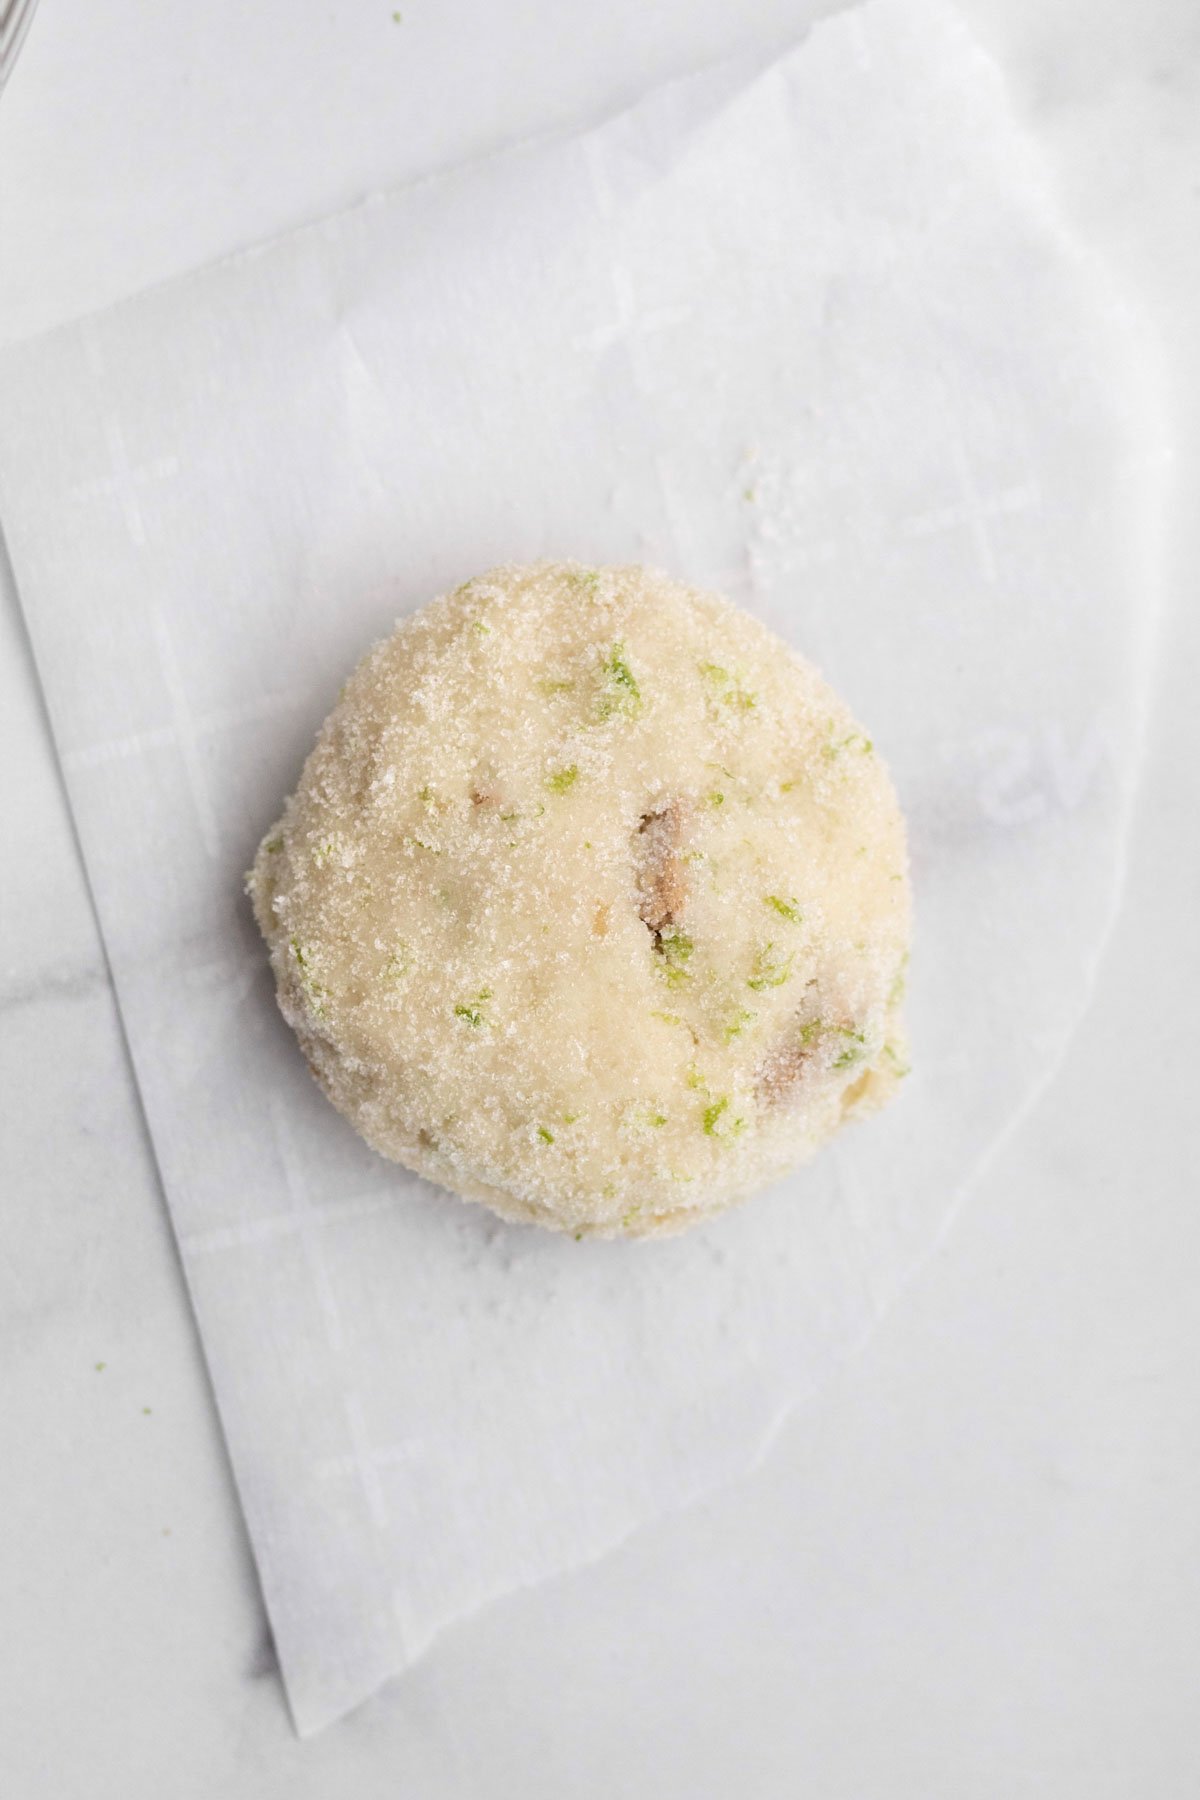 The dough covered in key lime zest infused granulated sugar.